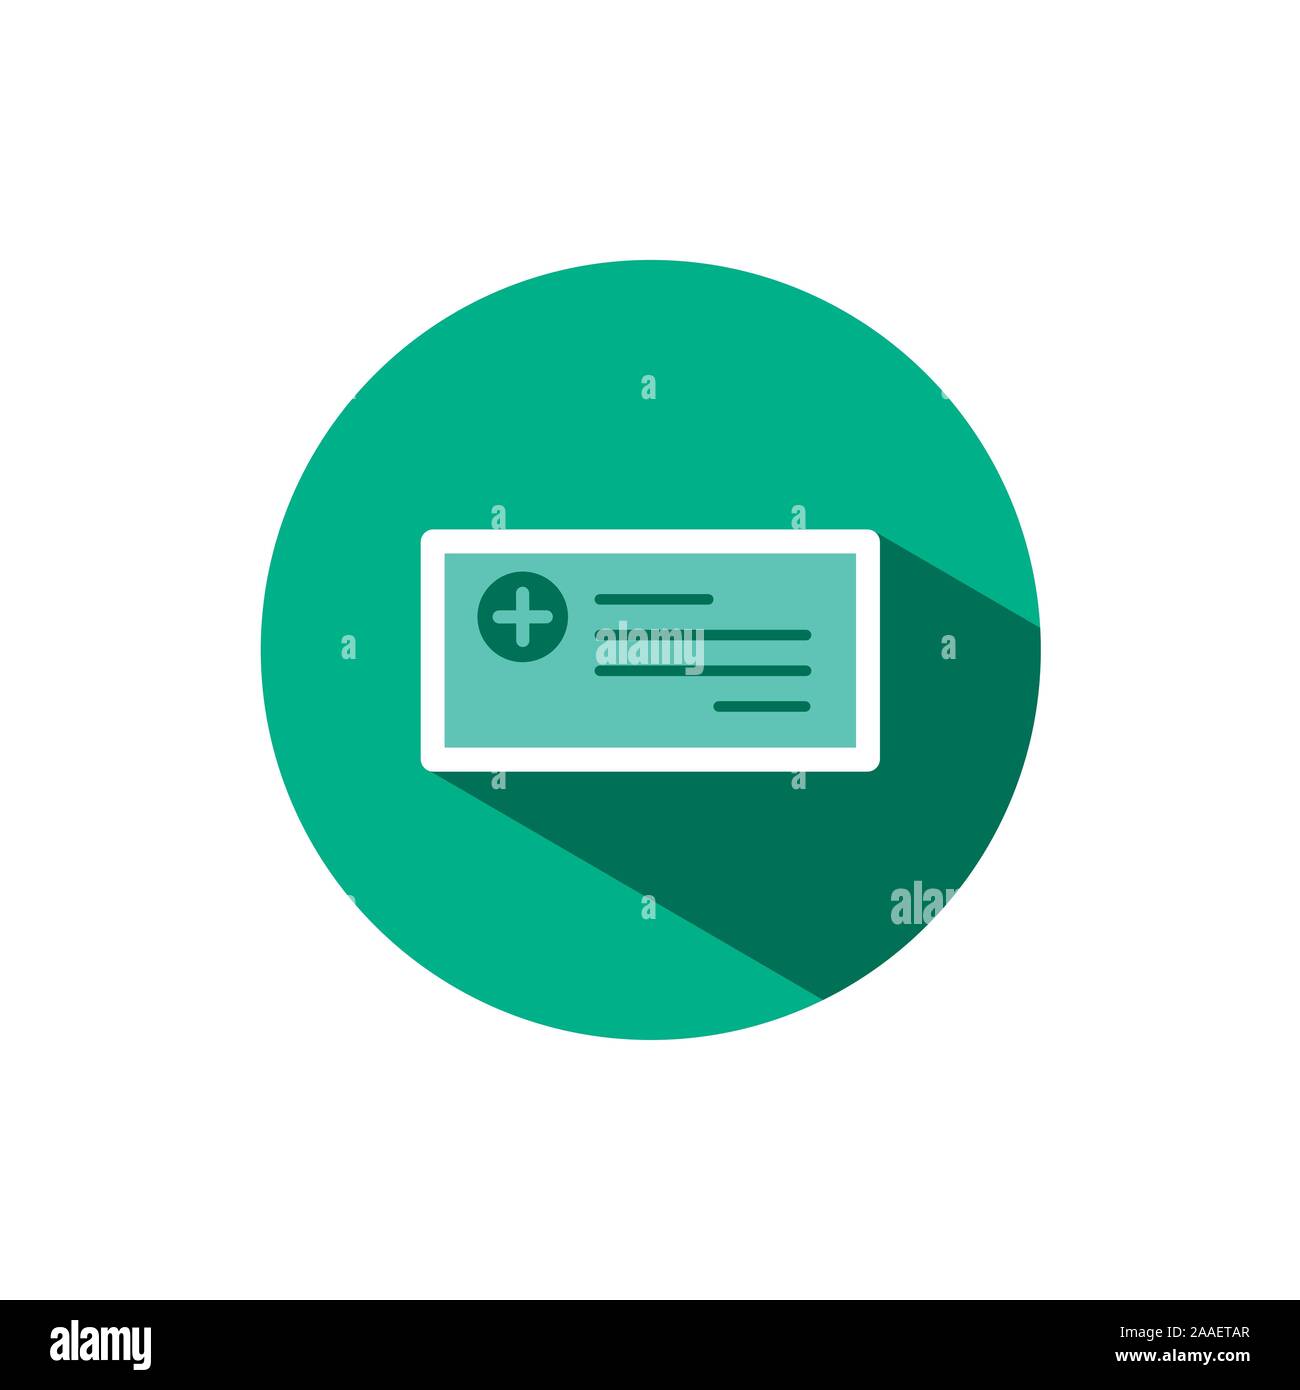 Prescription icon with shadow on a green circle. Flat color vector pharmacy illustration Stock Vector